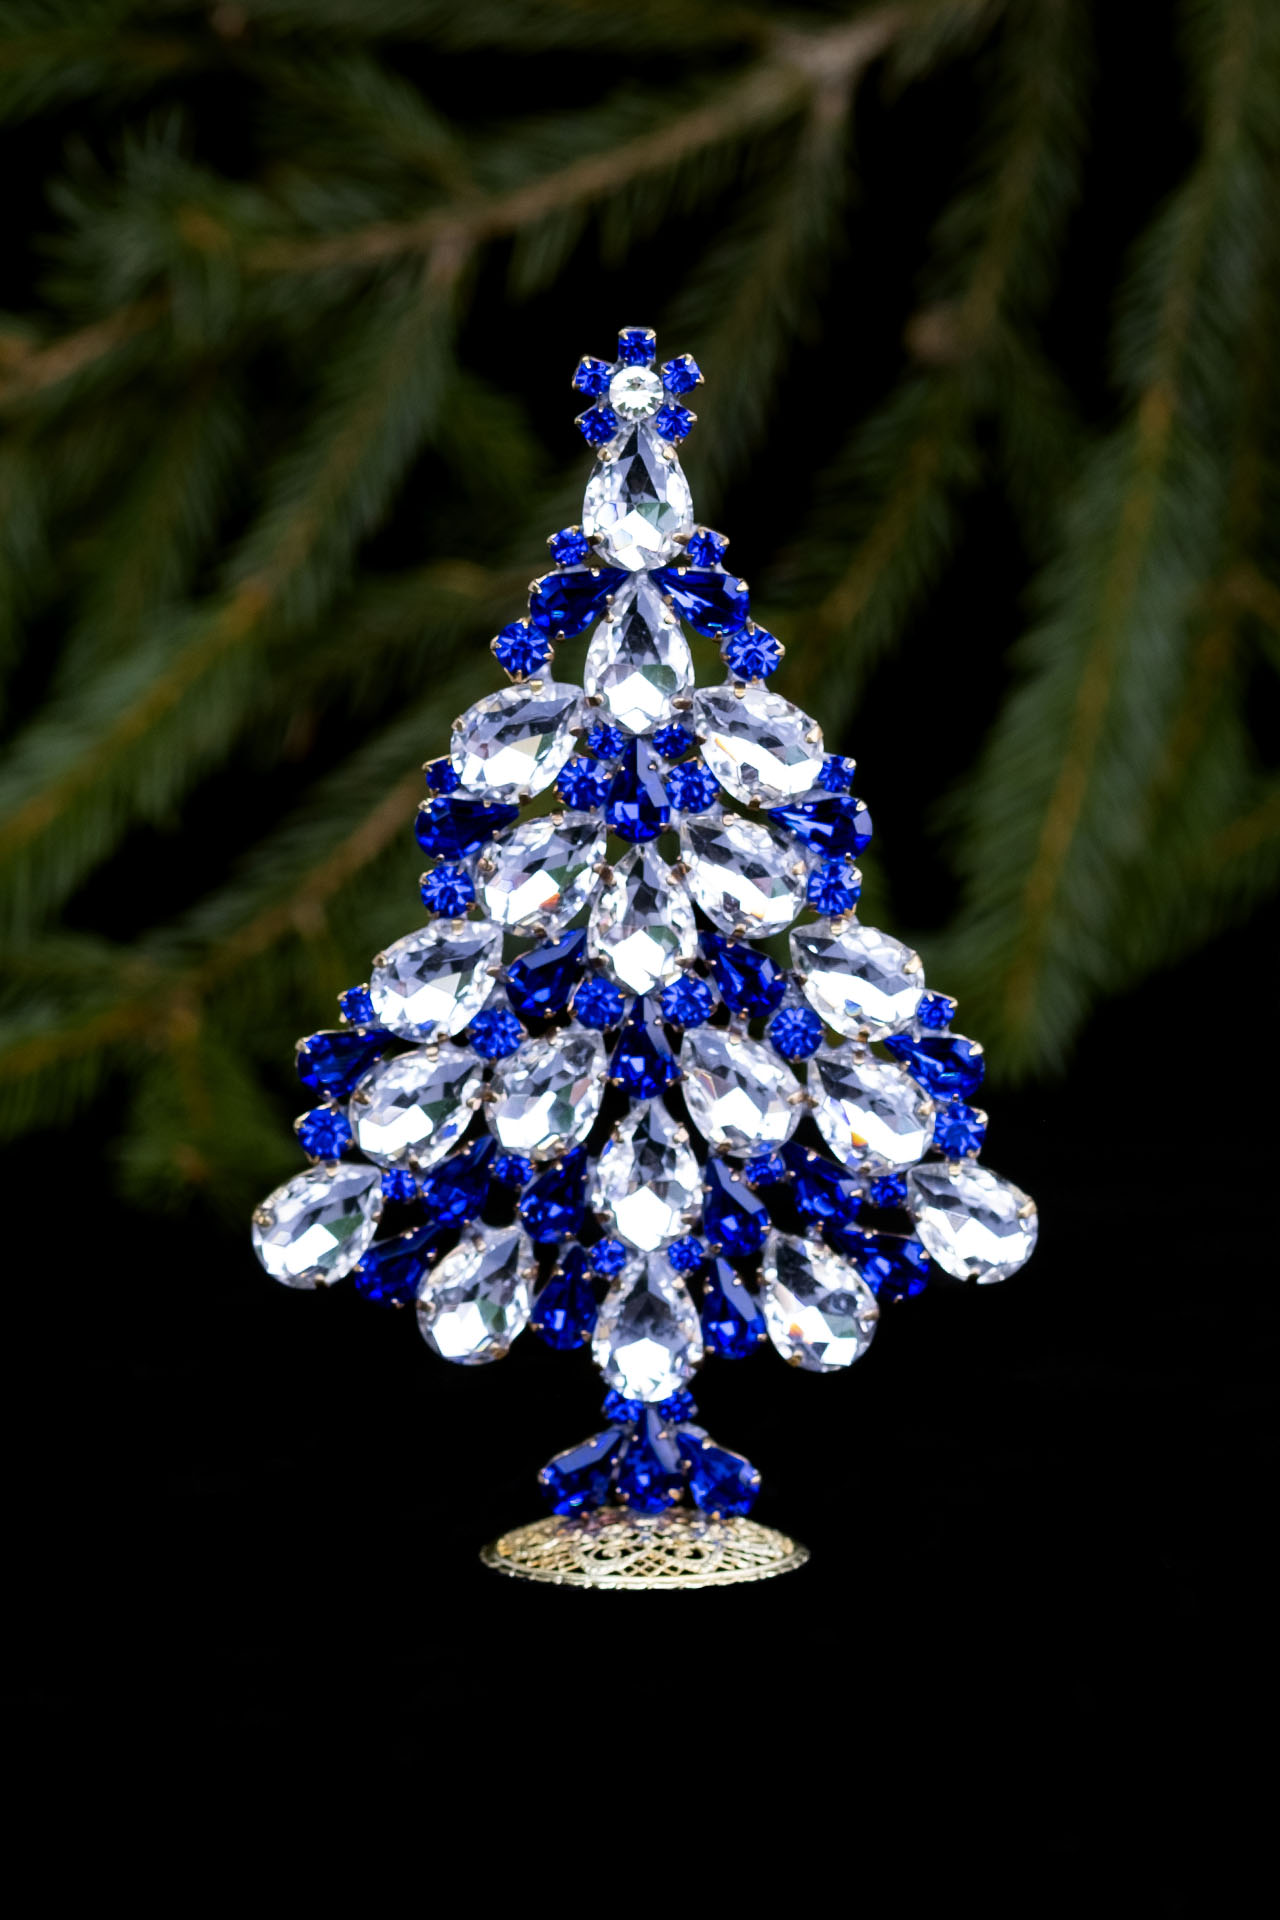 Delightful Xmas tree, handcrafted with ornament